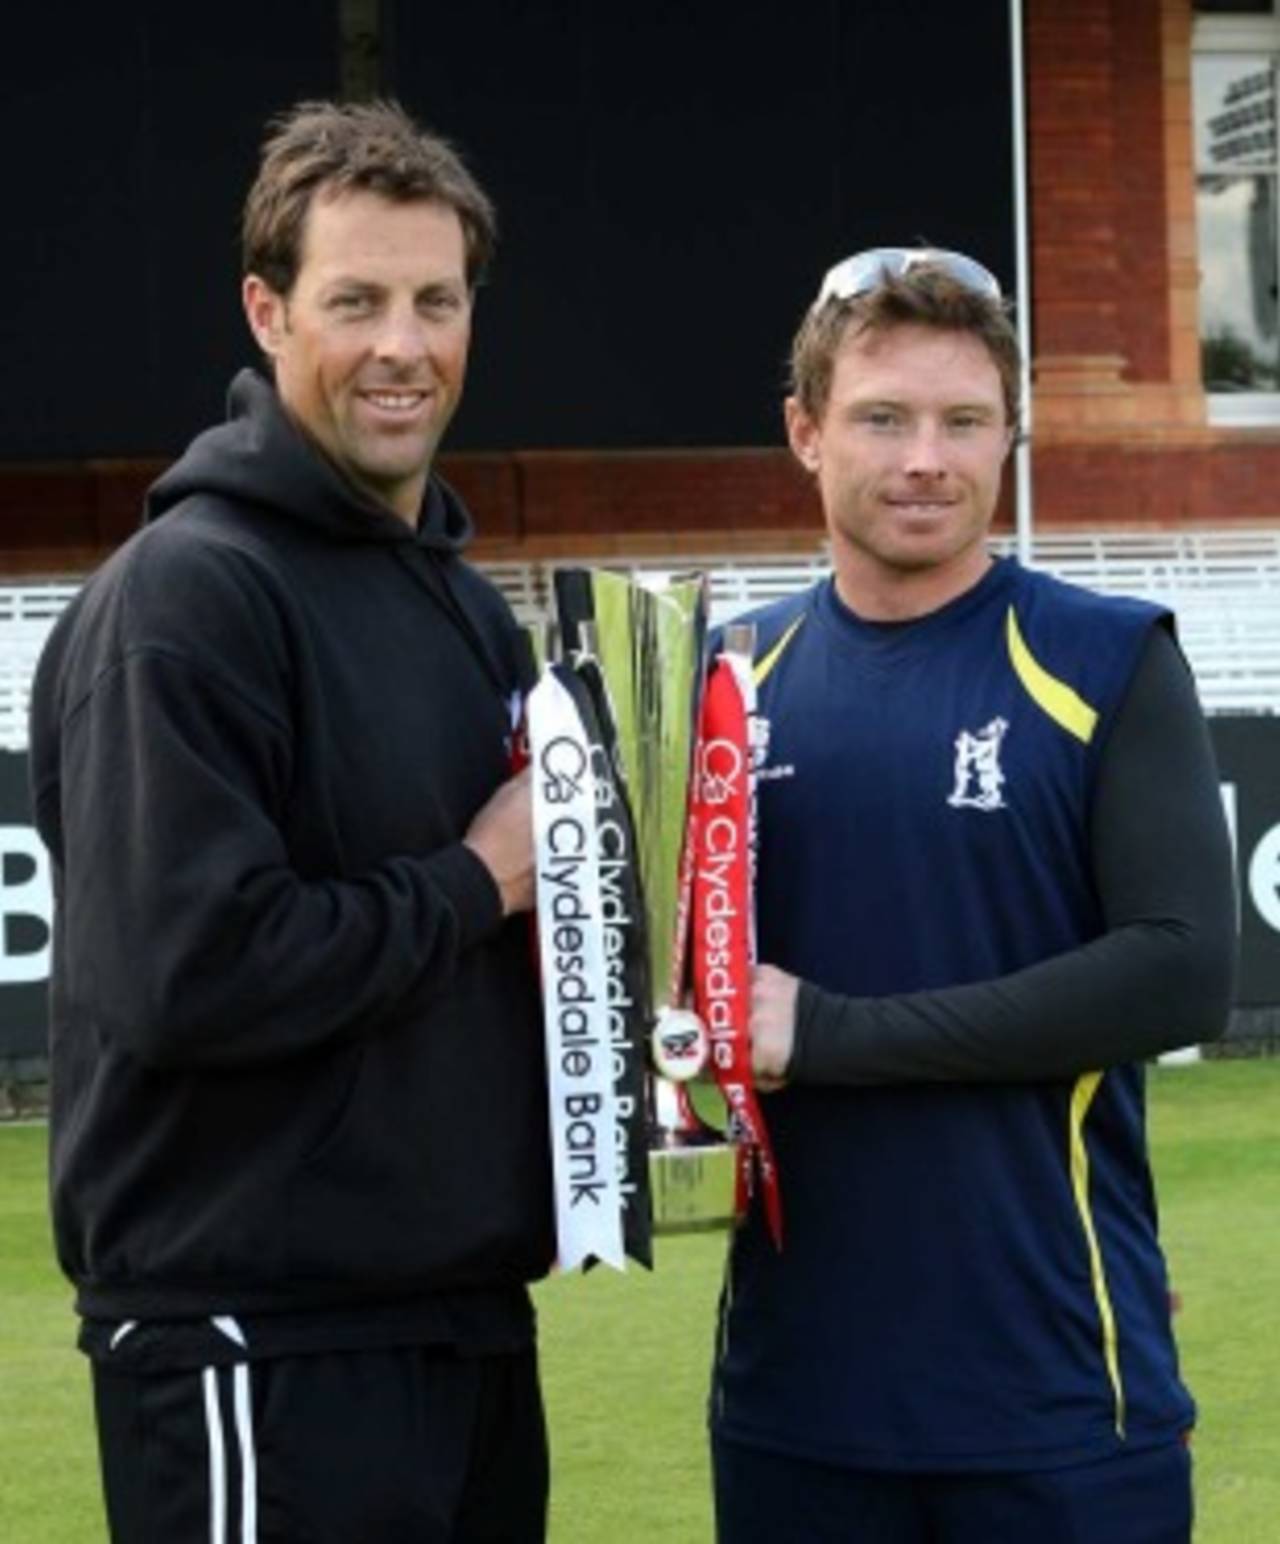 Marcus Trescothick and Ian Bell are both hoping to walk away with the silverware on Saturday&nbsp;&nbsp;&bull;&nbsp;&nbsp;Clare Skinner/MCC